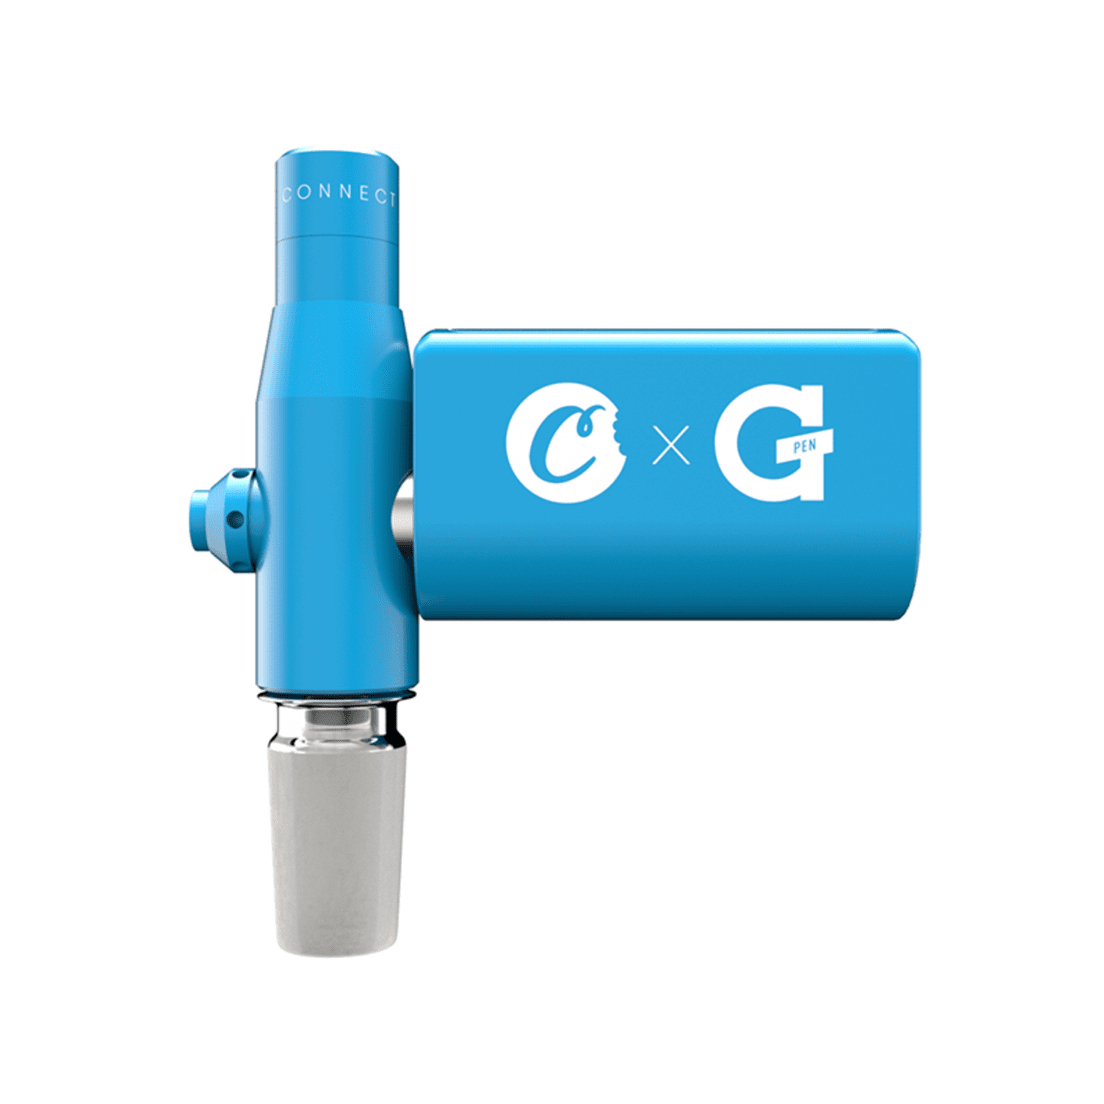 COOKIES X G PEN CONNECT VAPORIZER AVAILABLE ONLINE ONLY REGULAR CUSTOMER CAN SPEND POINTS